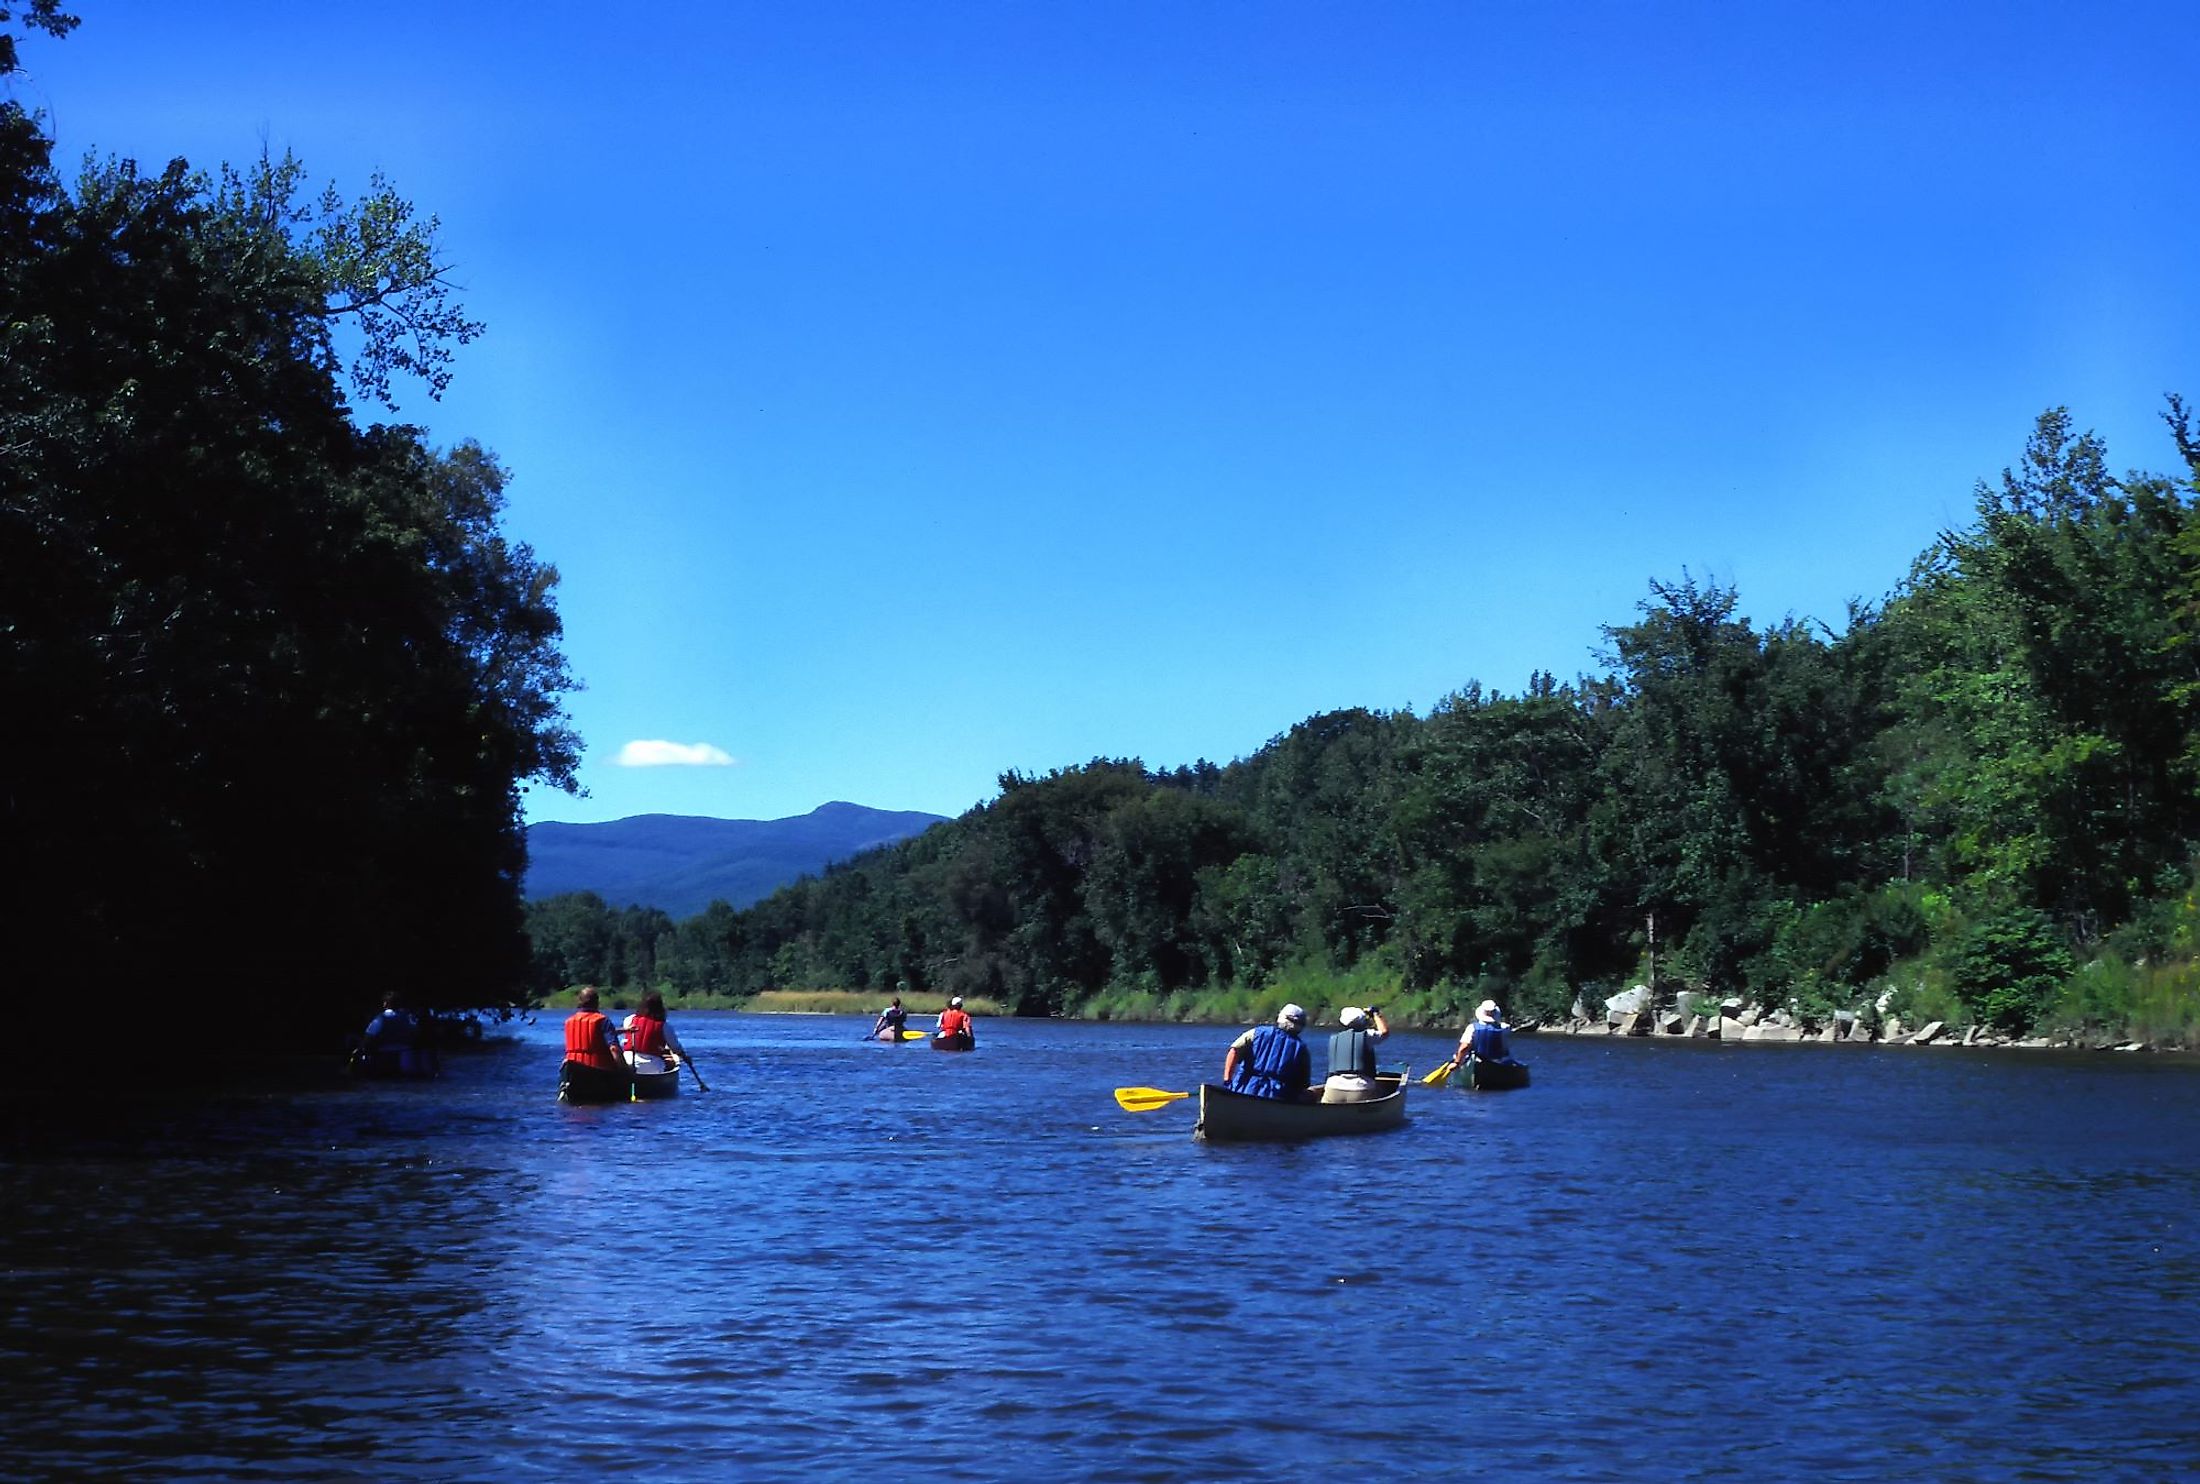 Canoeing the Winooski River in Vermont. Editorial credit: Malachi Jacobs / Shutterstock.com